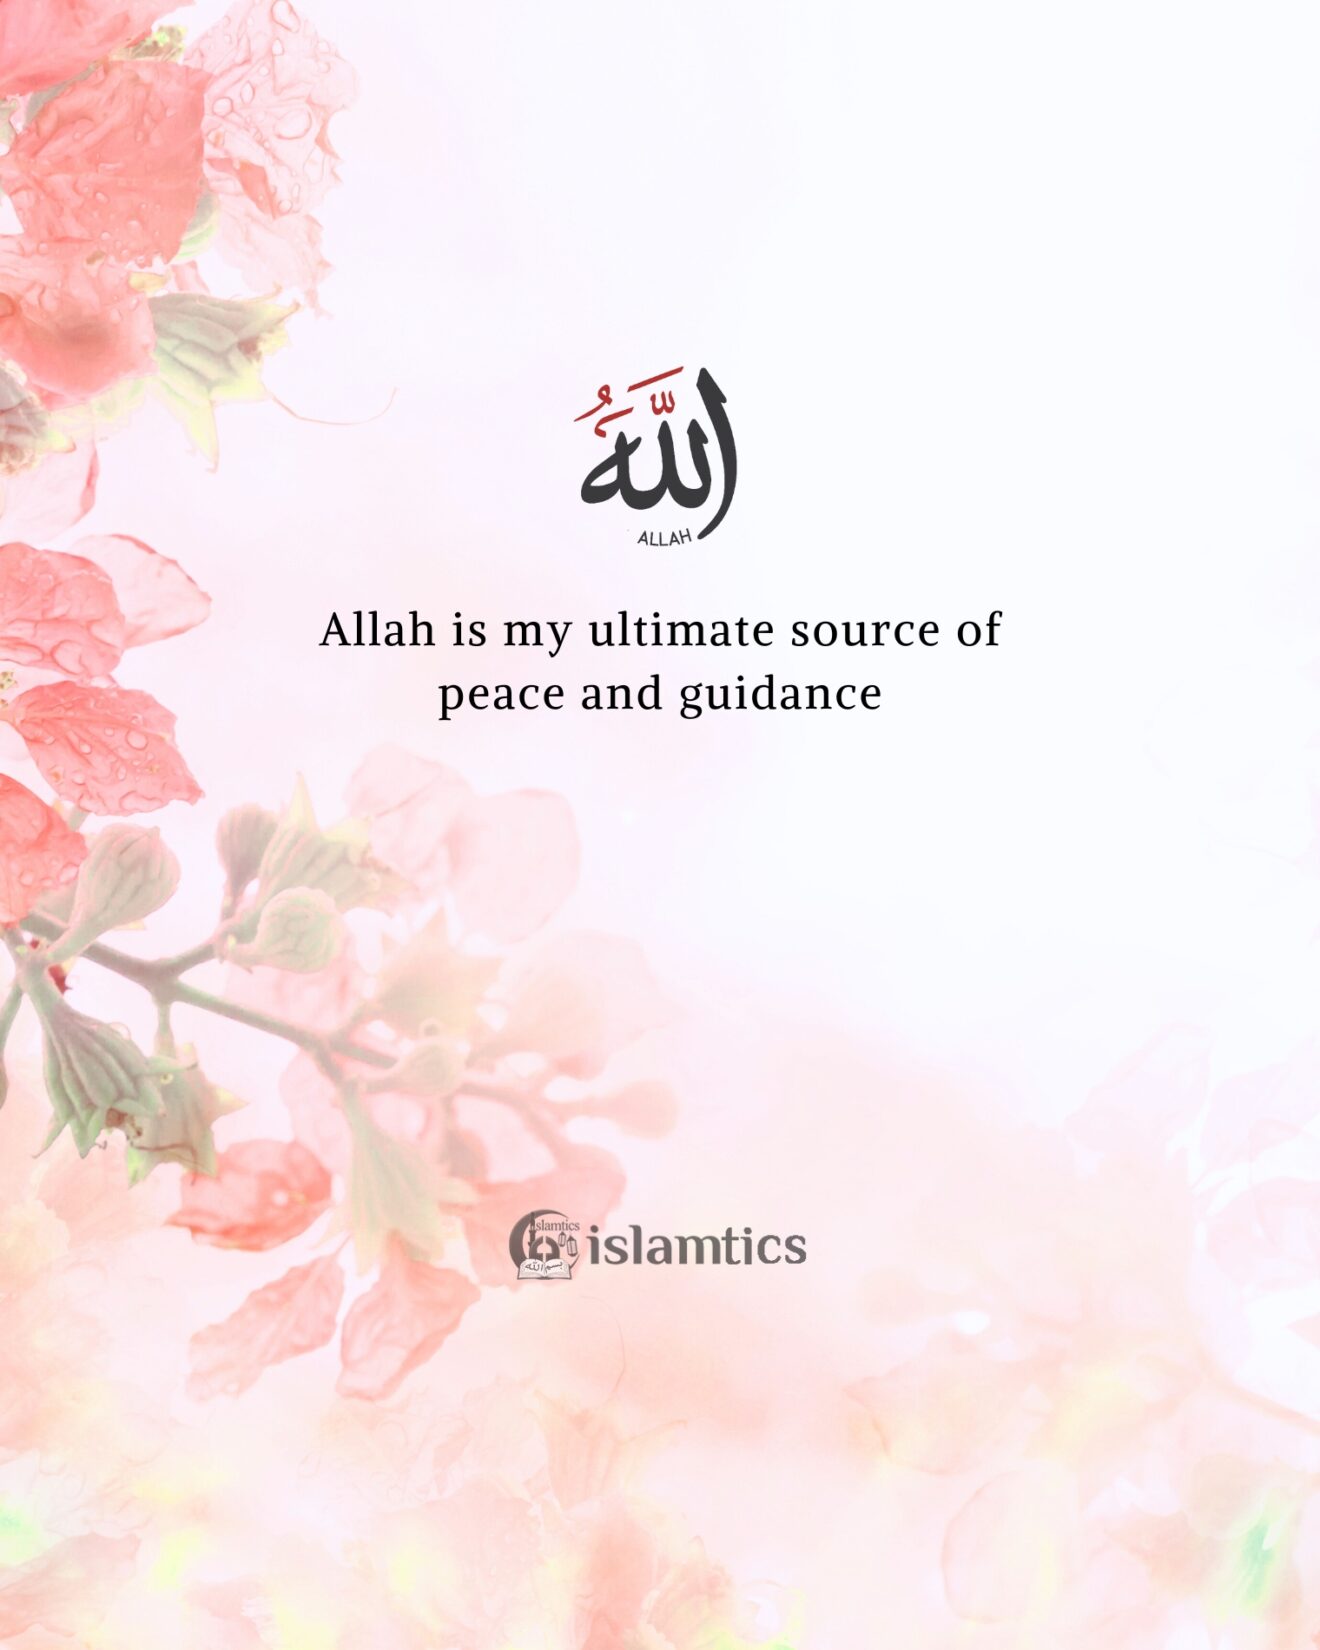 Allah is my ultimate source of peace and guidance